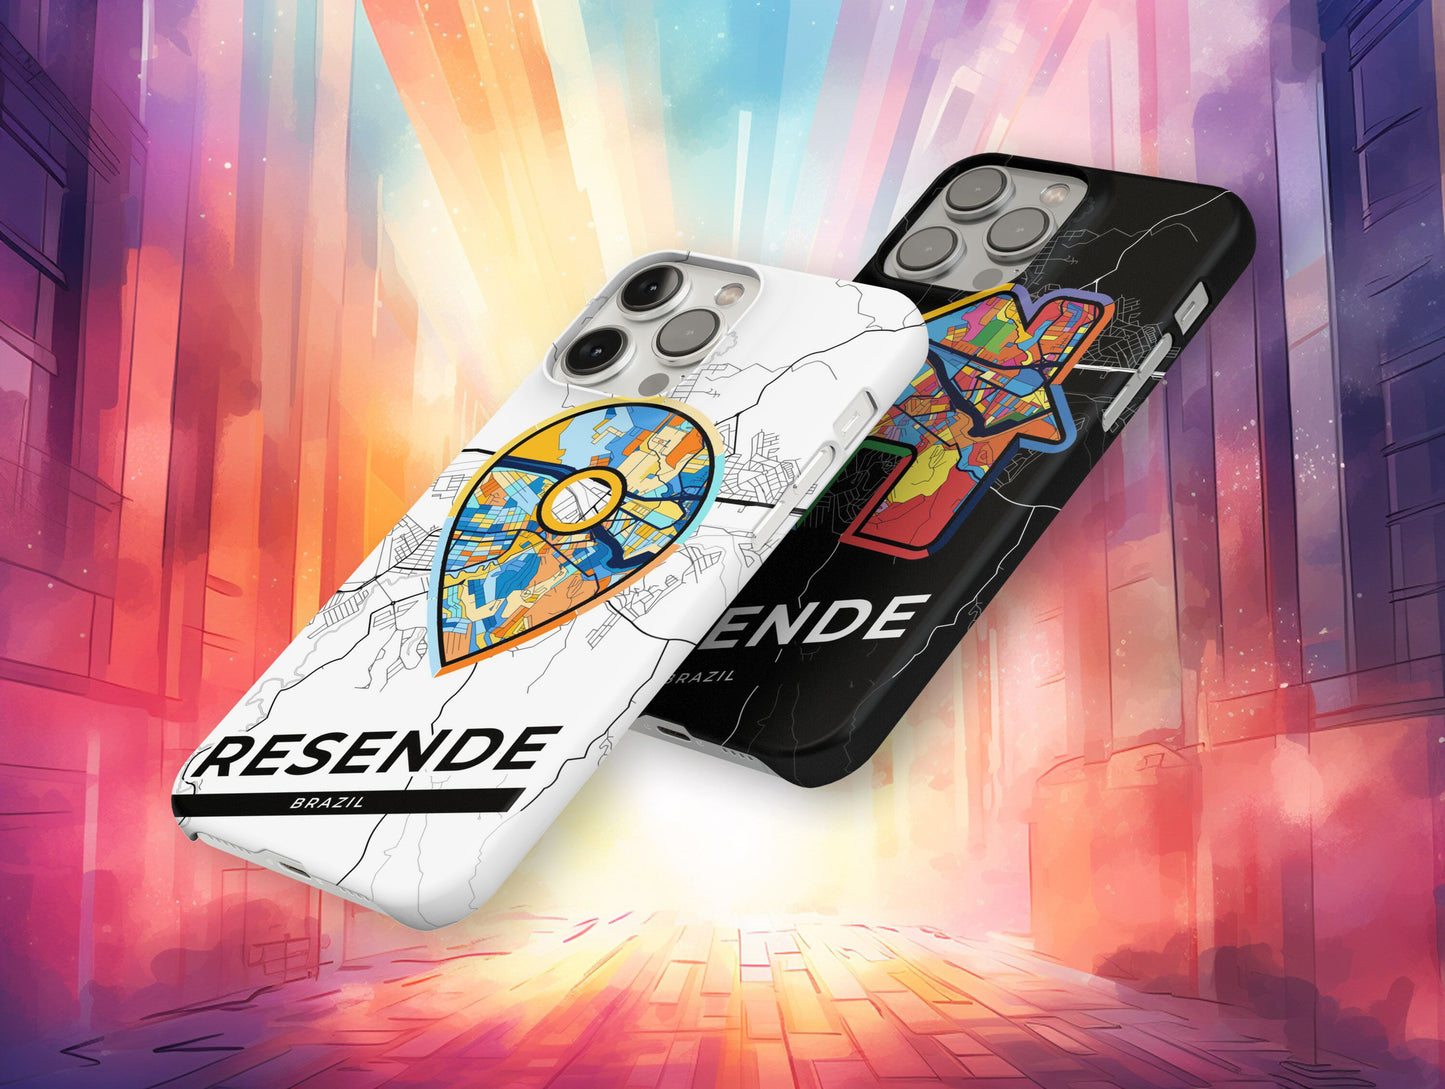 Resende Brazil slim phone case with colorful icon. Birthday, wedding or housewarming gift. Couple match cases.